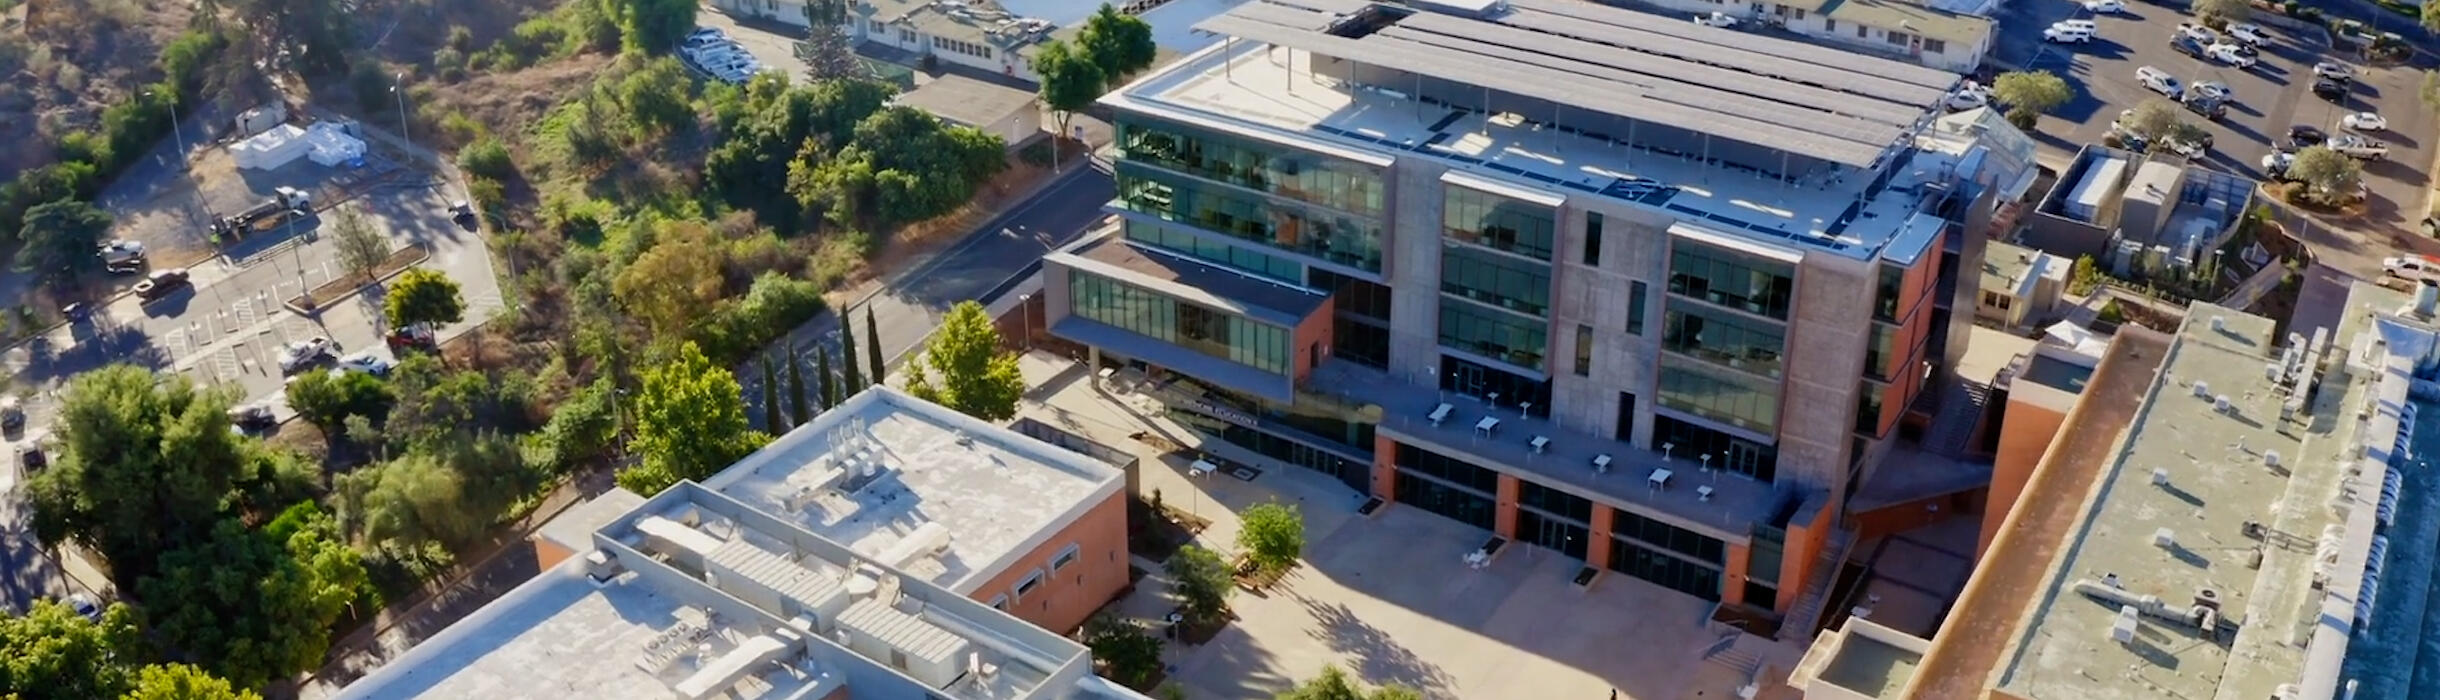 Drone view of the SOM Education Building